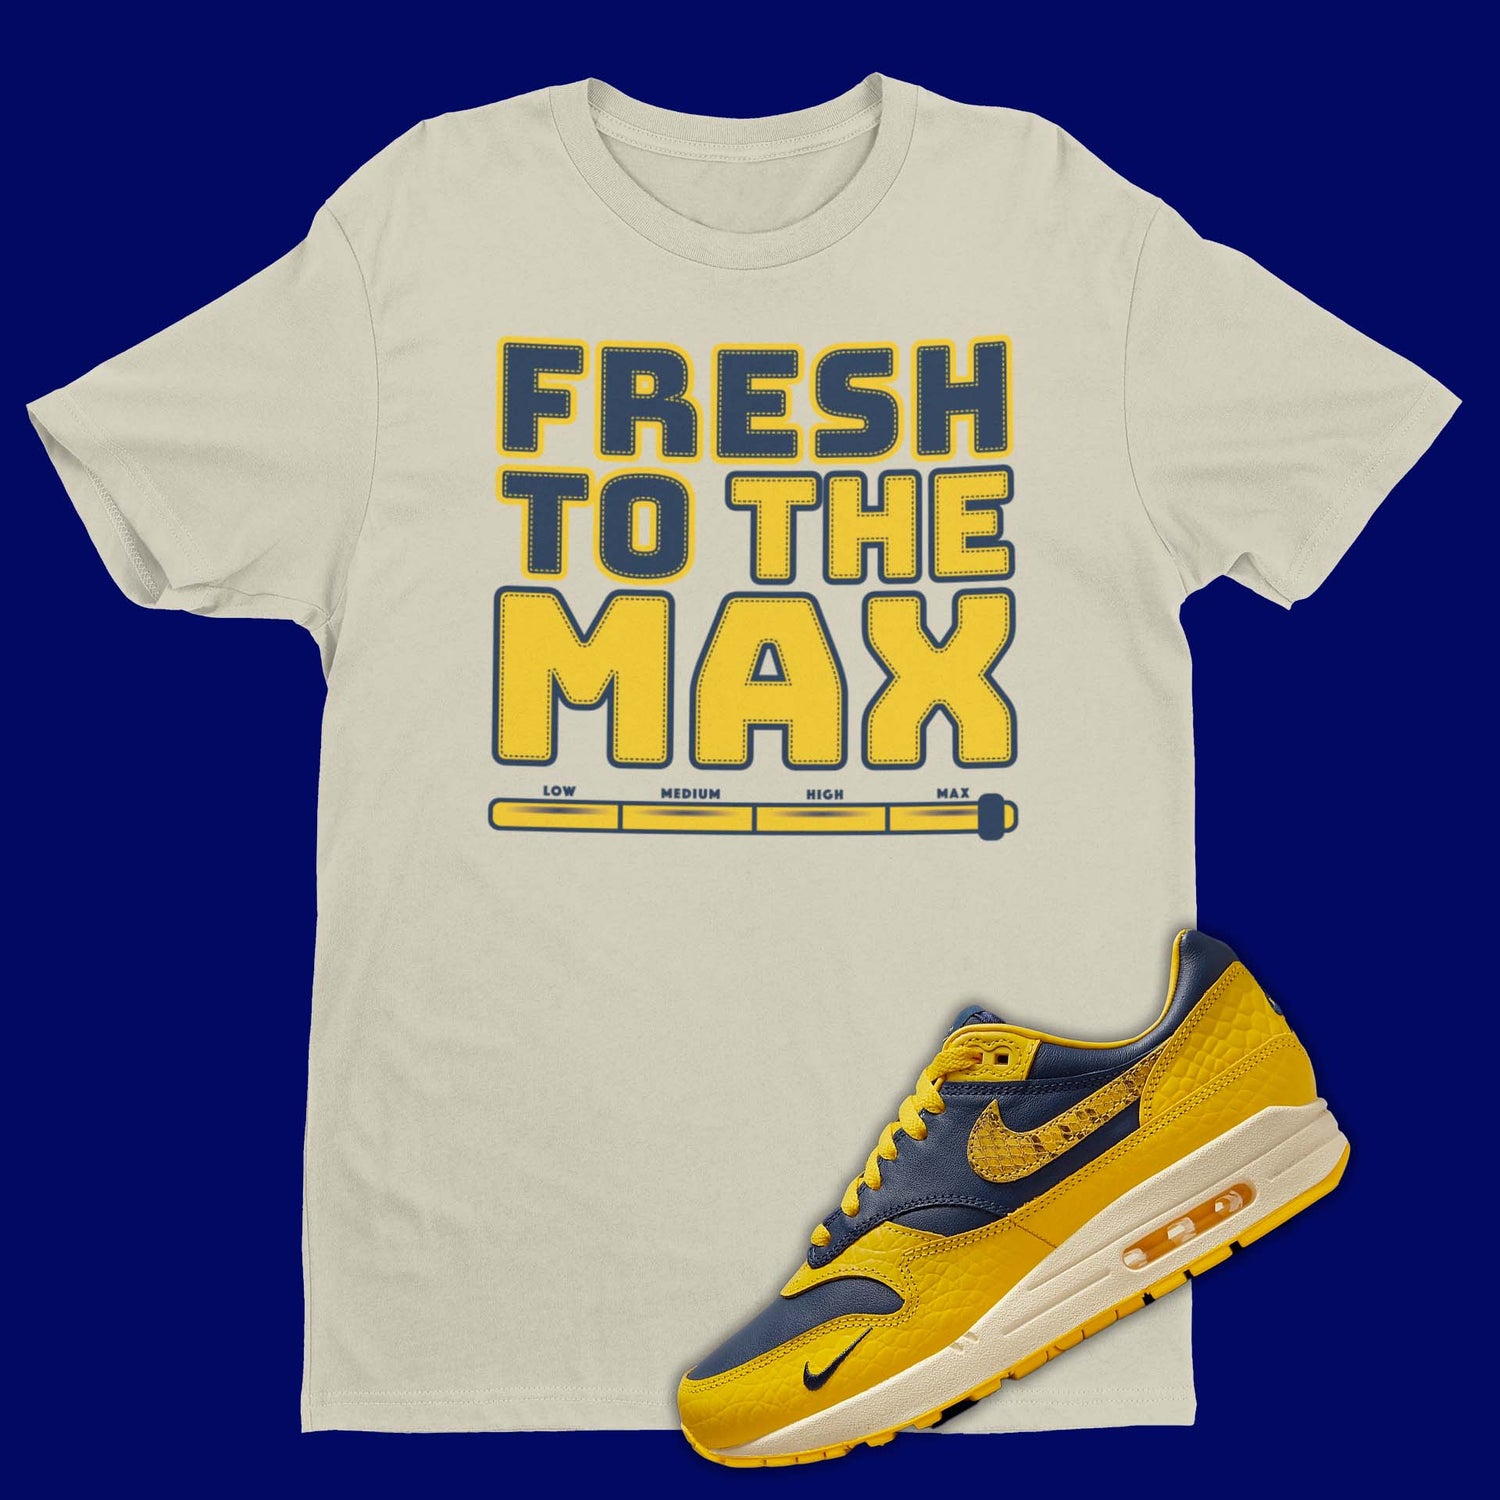 toddler rookie galaxy red blue gold black card - Fresh The Max Nike toddler Air Max 1 CO.JP Michigan Matching T | Shirt - NwfpsShops